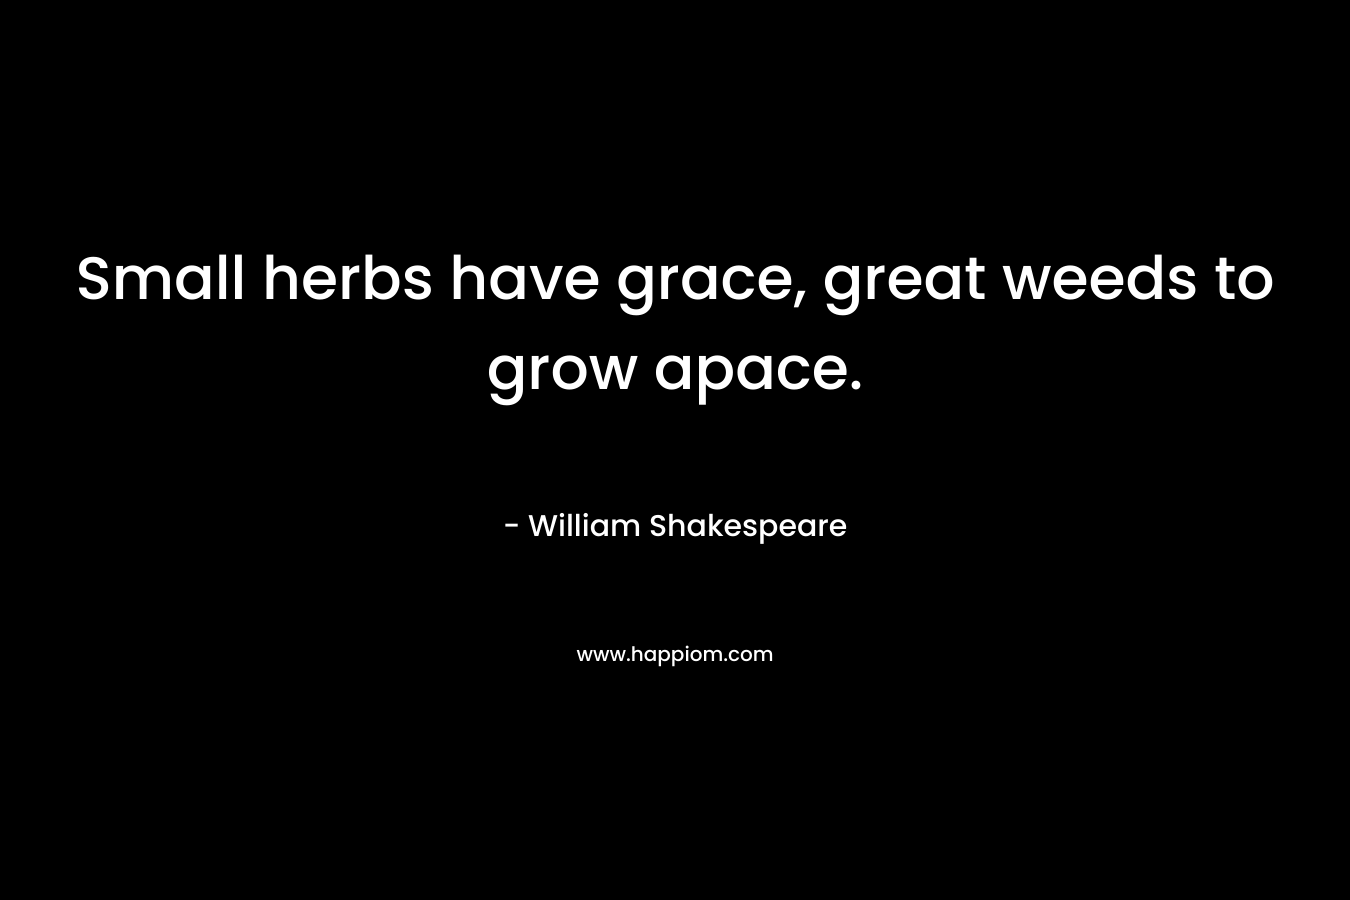 Small herbs have grace, great weeds to grow apace. – William Shakespeare